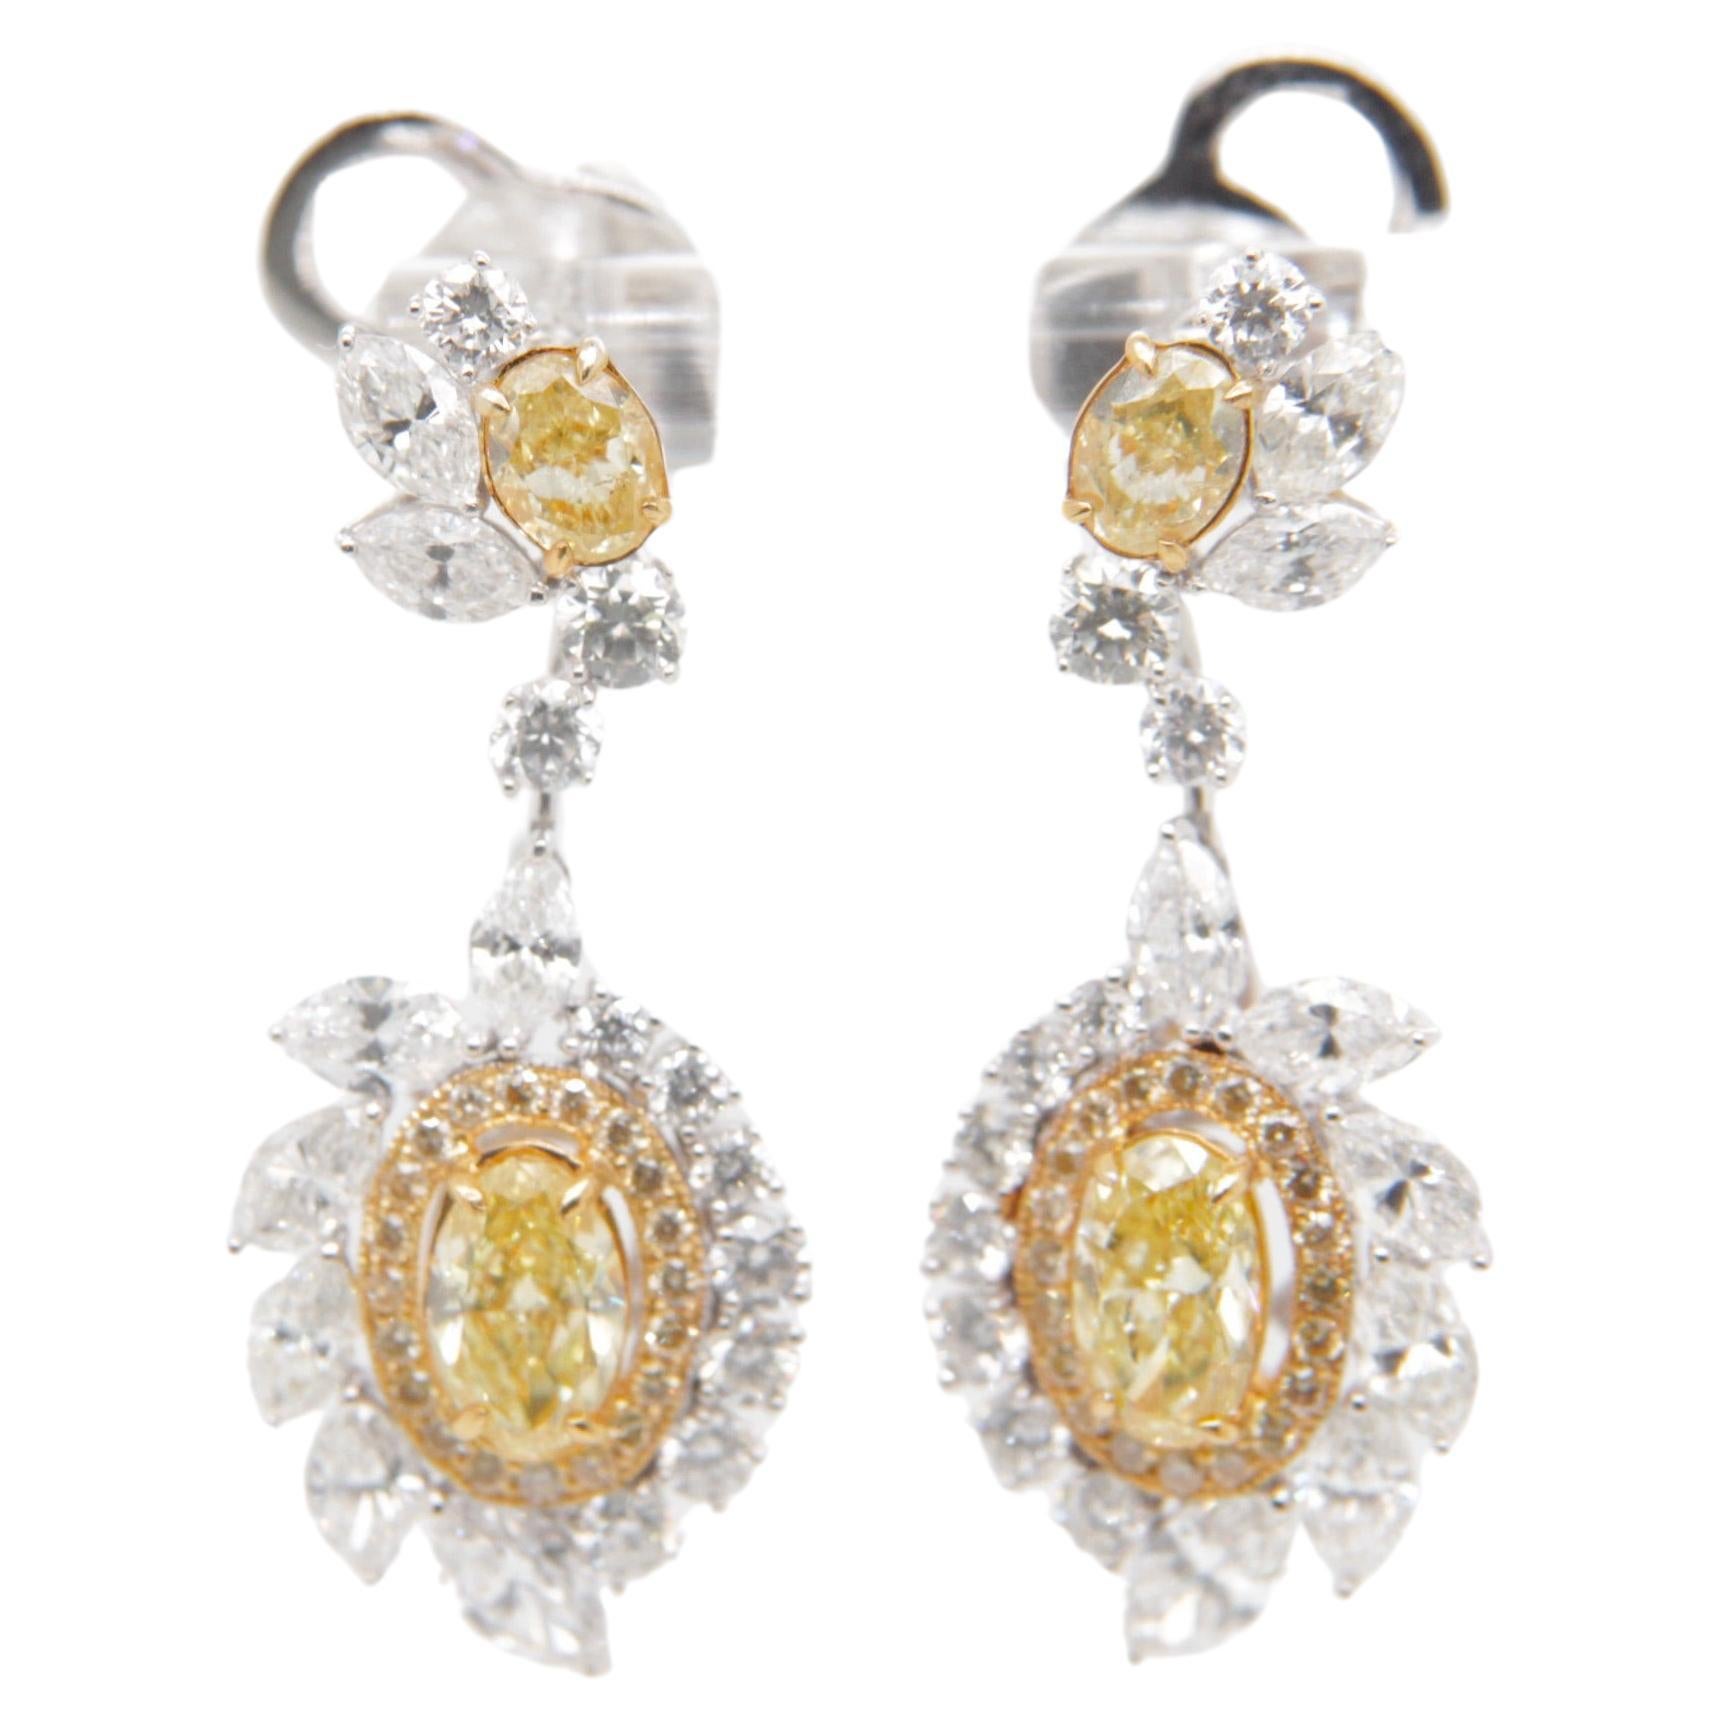 GIA Certified 1.21 Carat Fancy Intense Yellow Diamond & Marquise Floral Earrings